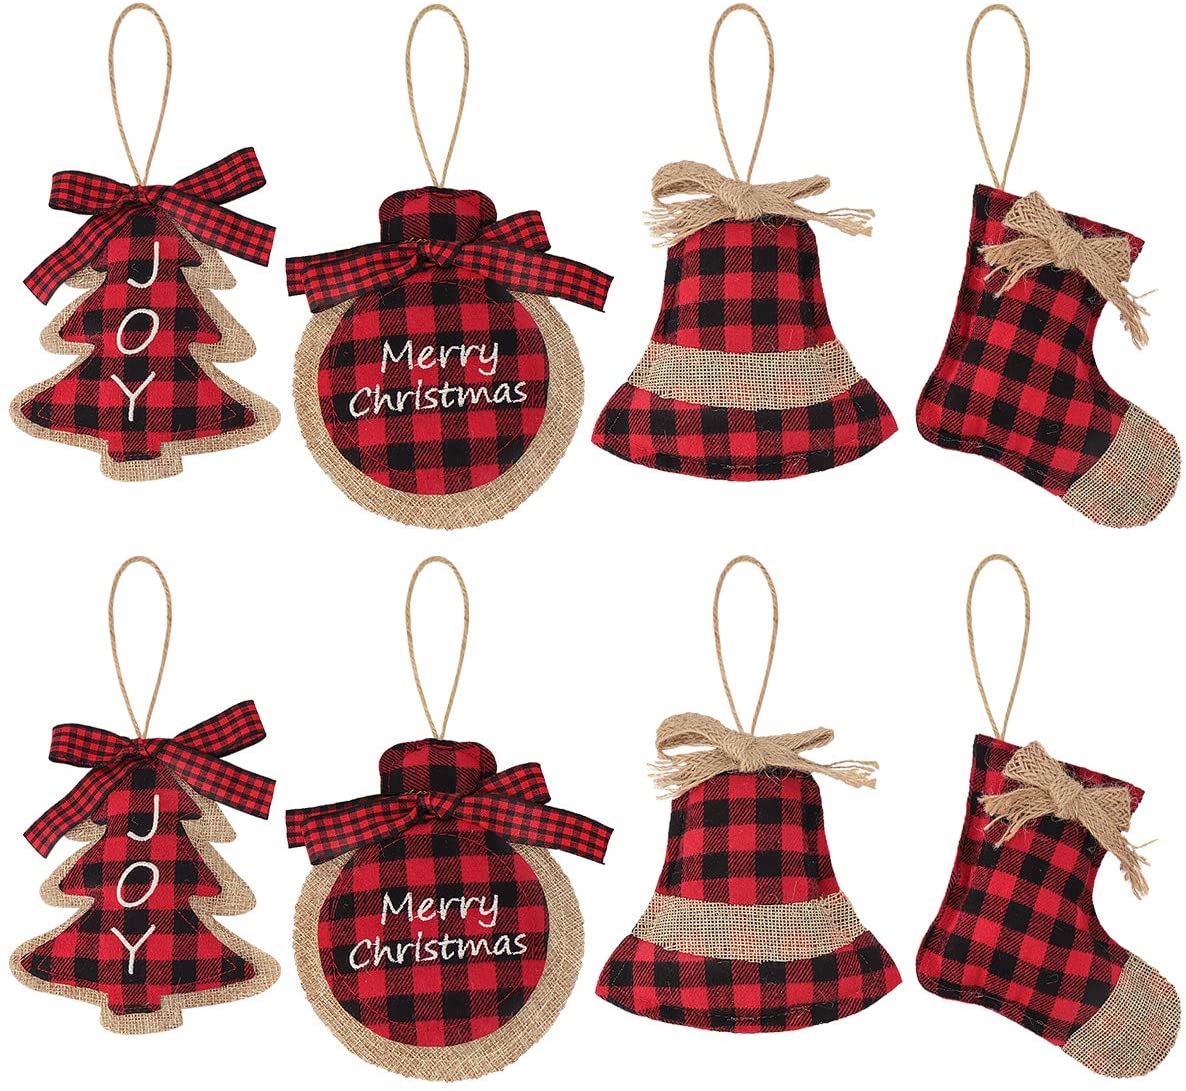 12 Pack Ornaments for Christmas Tree Decorations, Hanging Charms Christmas  Tree Ornament Holiday Decorations - Walmart.com